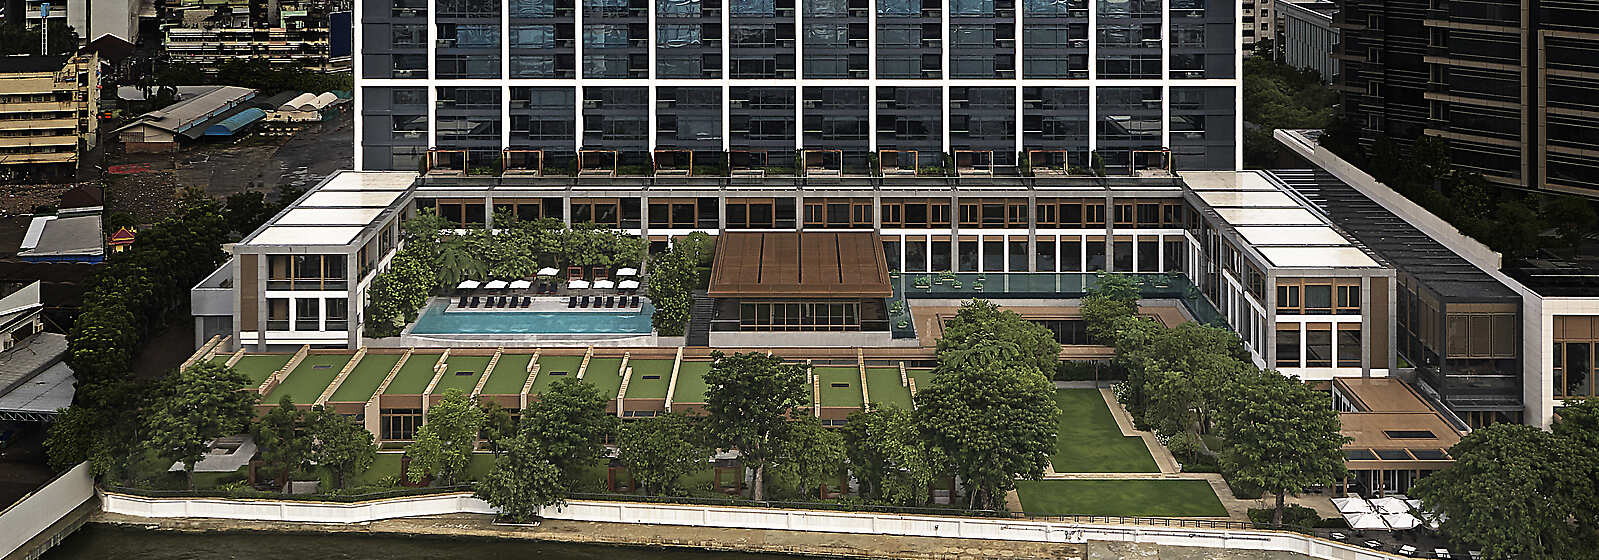 Capella Bangkok Paying Homage to the River. All accommodations and facilities are facing the river.